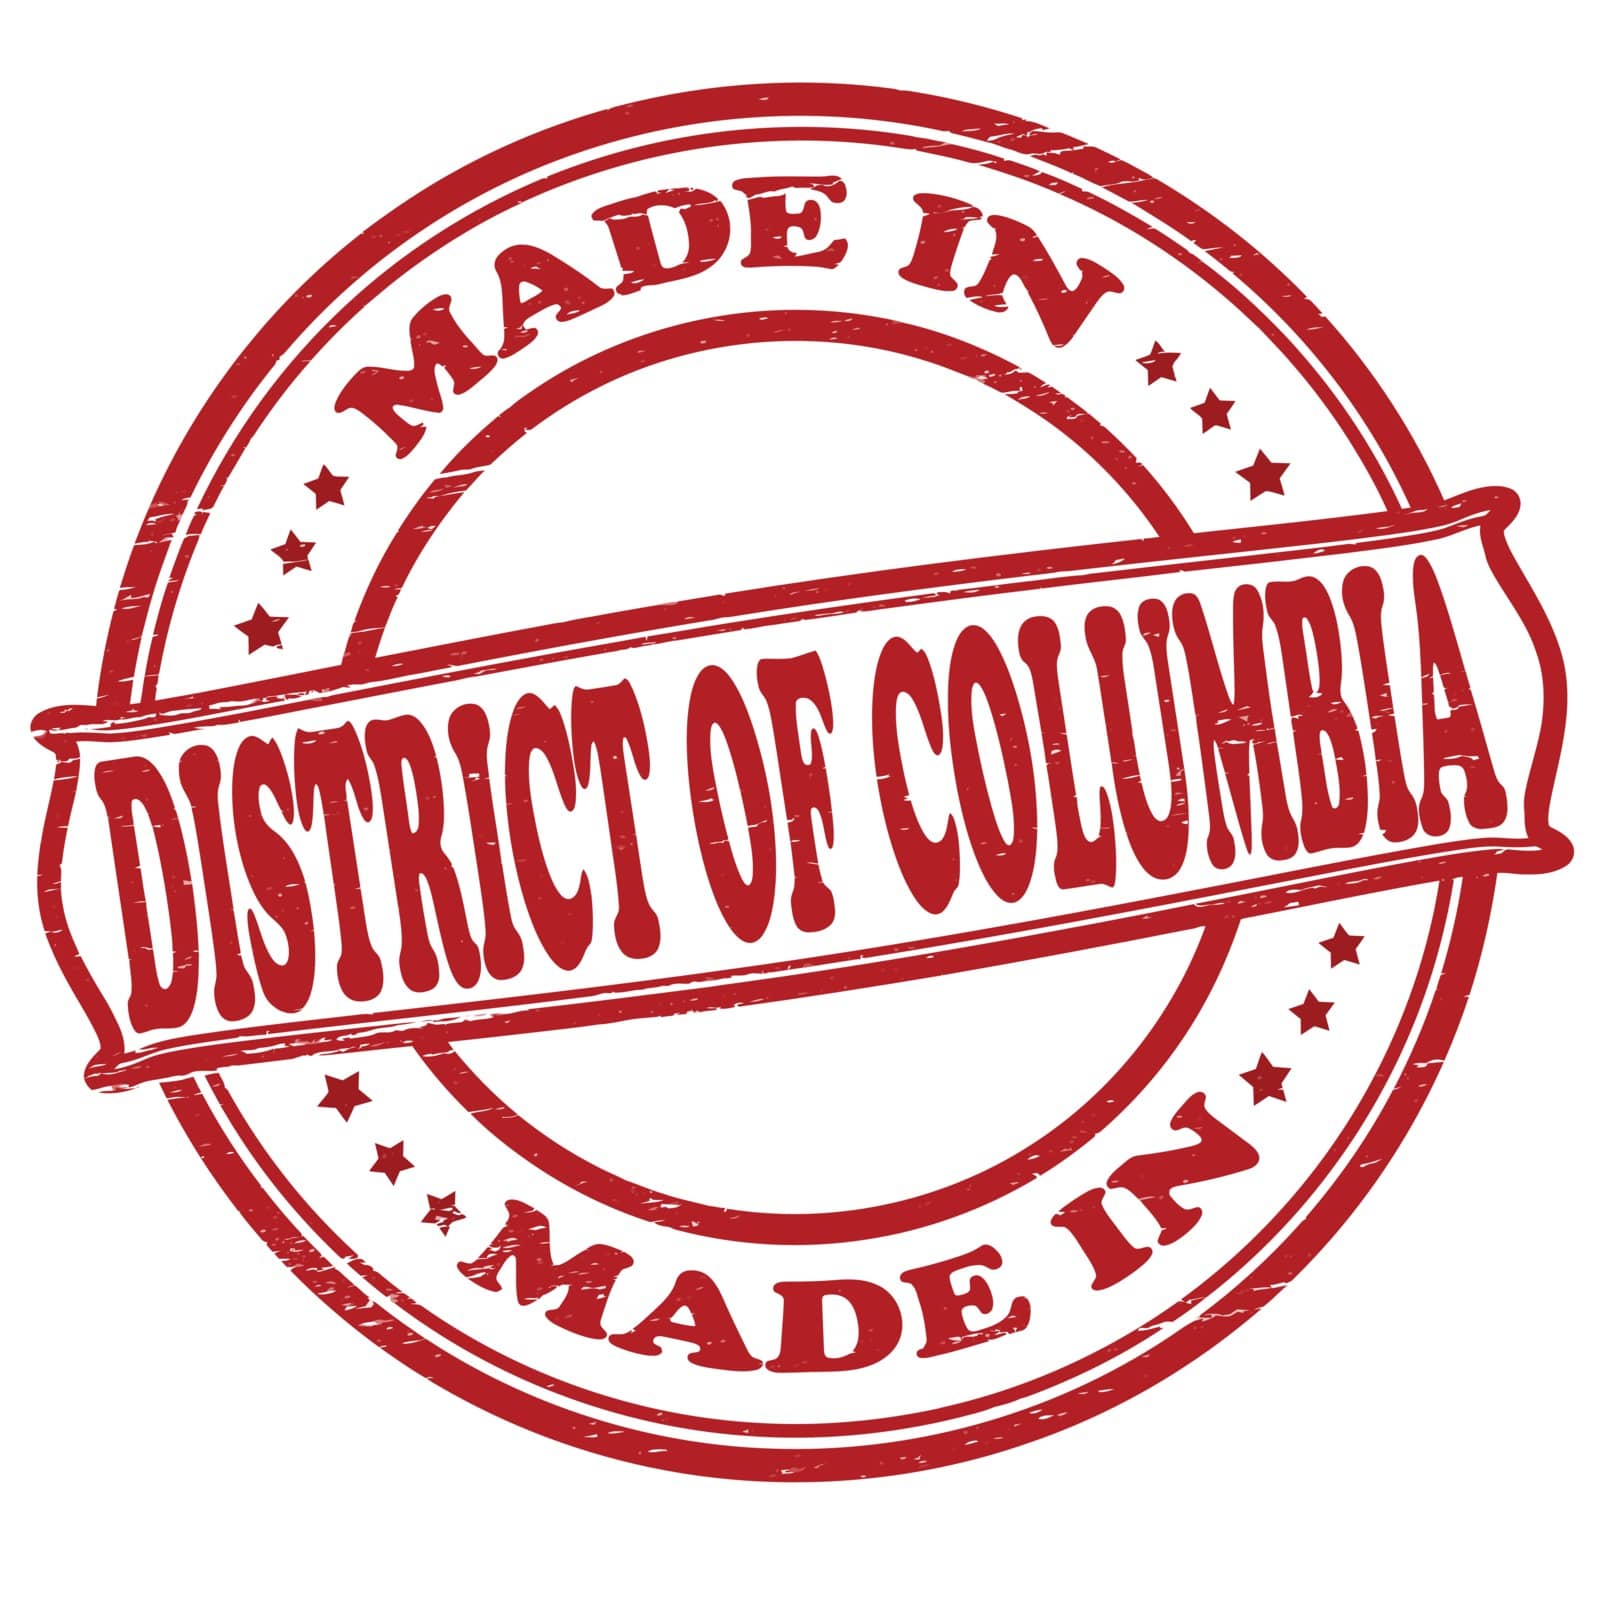 Made in District of Columbia by carmenbobo